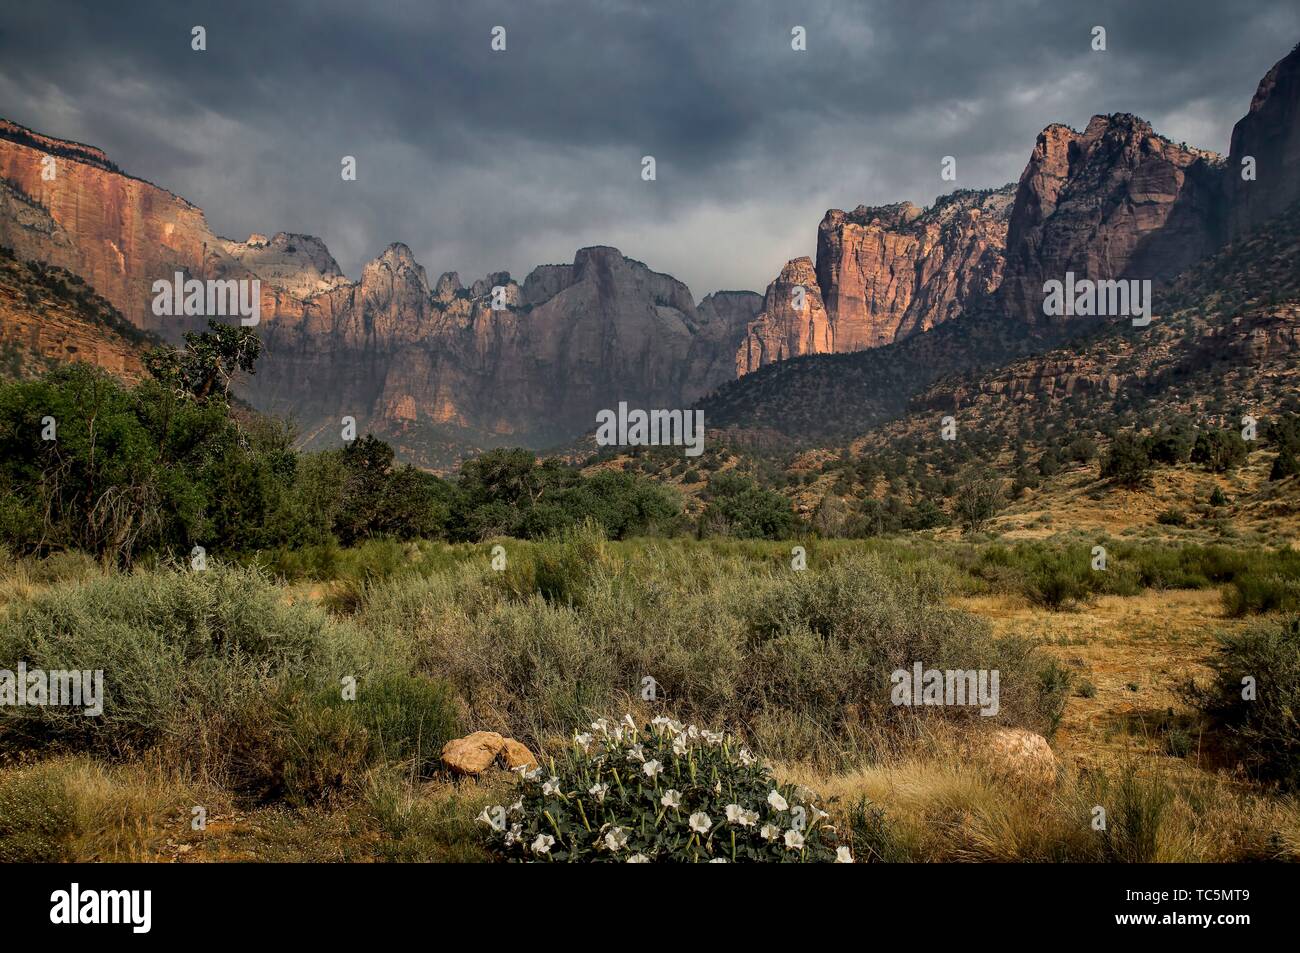 Monsoonal moisture has arrived during the hot summer at Zion National Park, Utah. Stock Photo